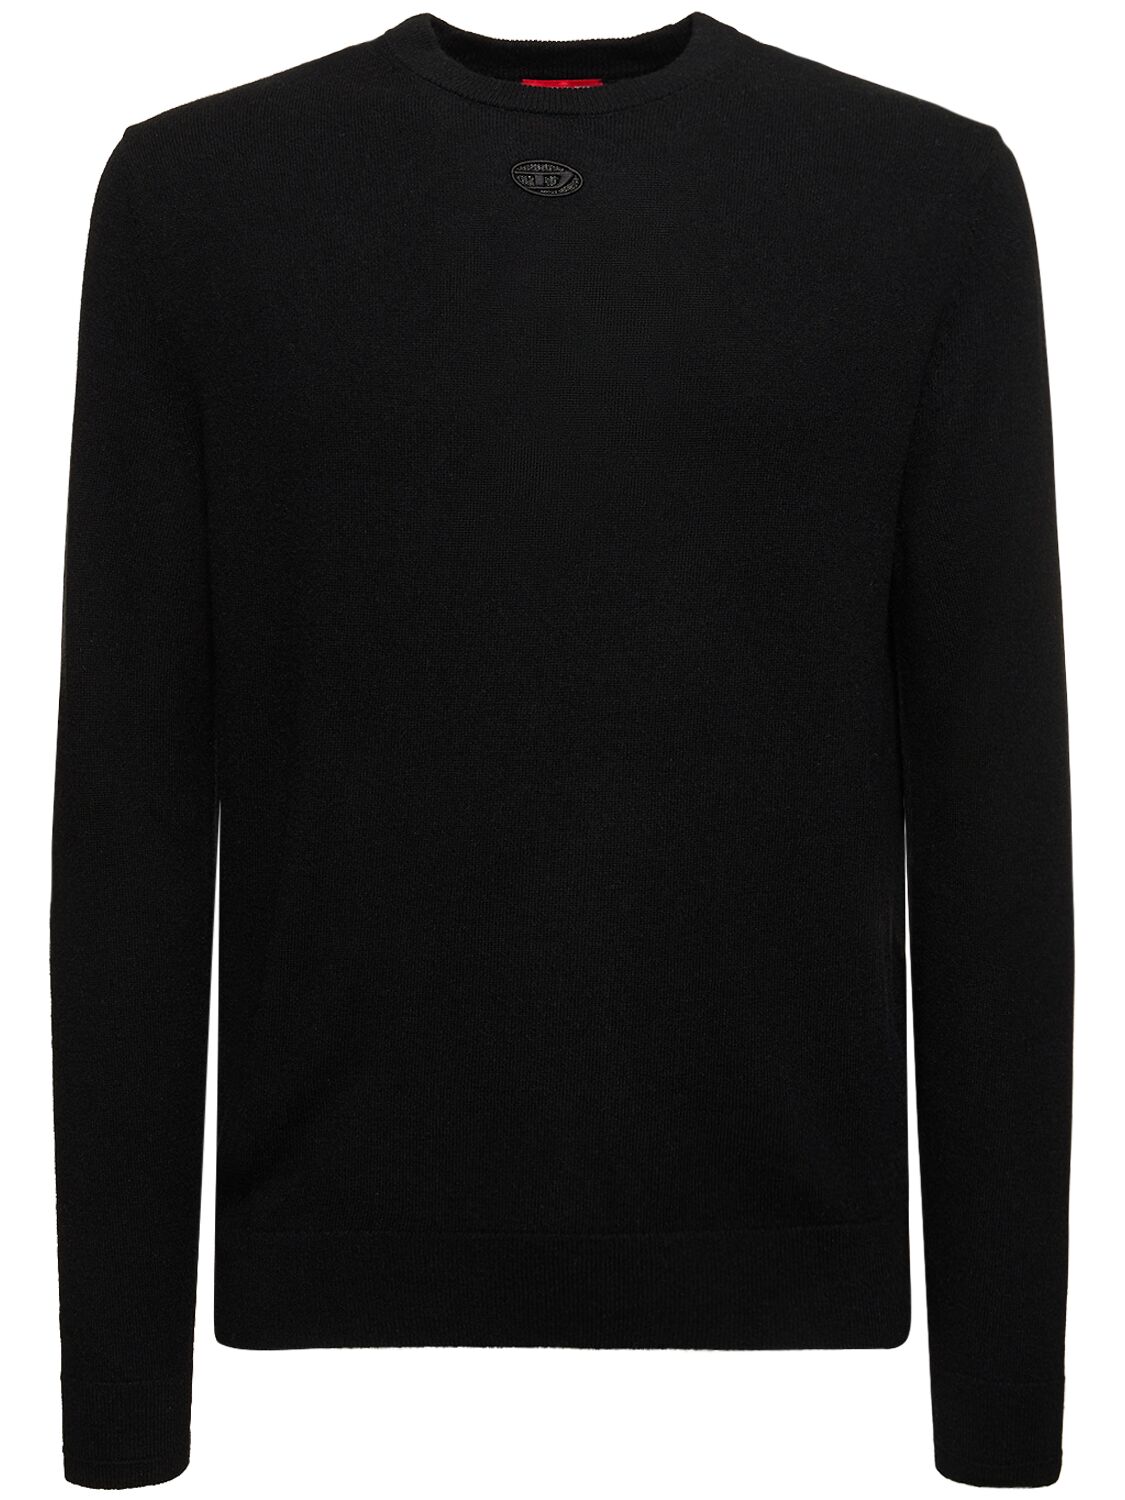 Image of Oval-d Wool & Cashmere Knit Sweater